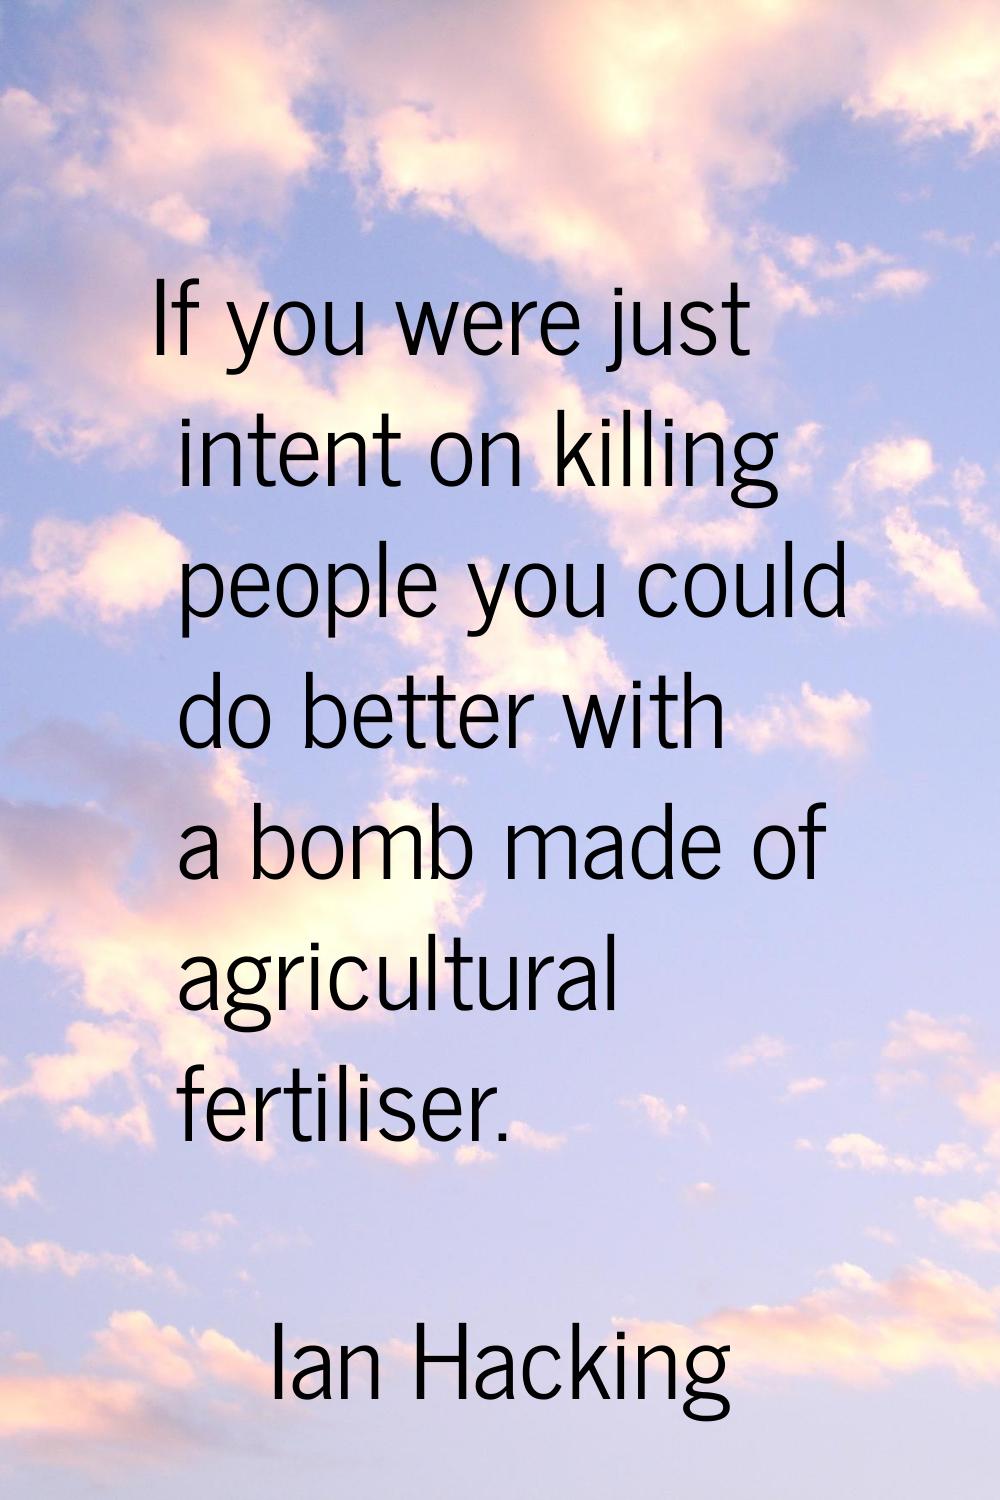 If you were just intent on killing people you could do better with a bomb made of agricultural fert